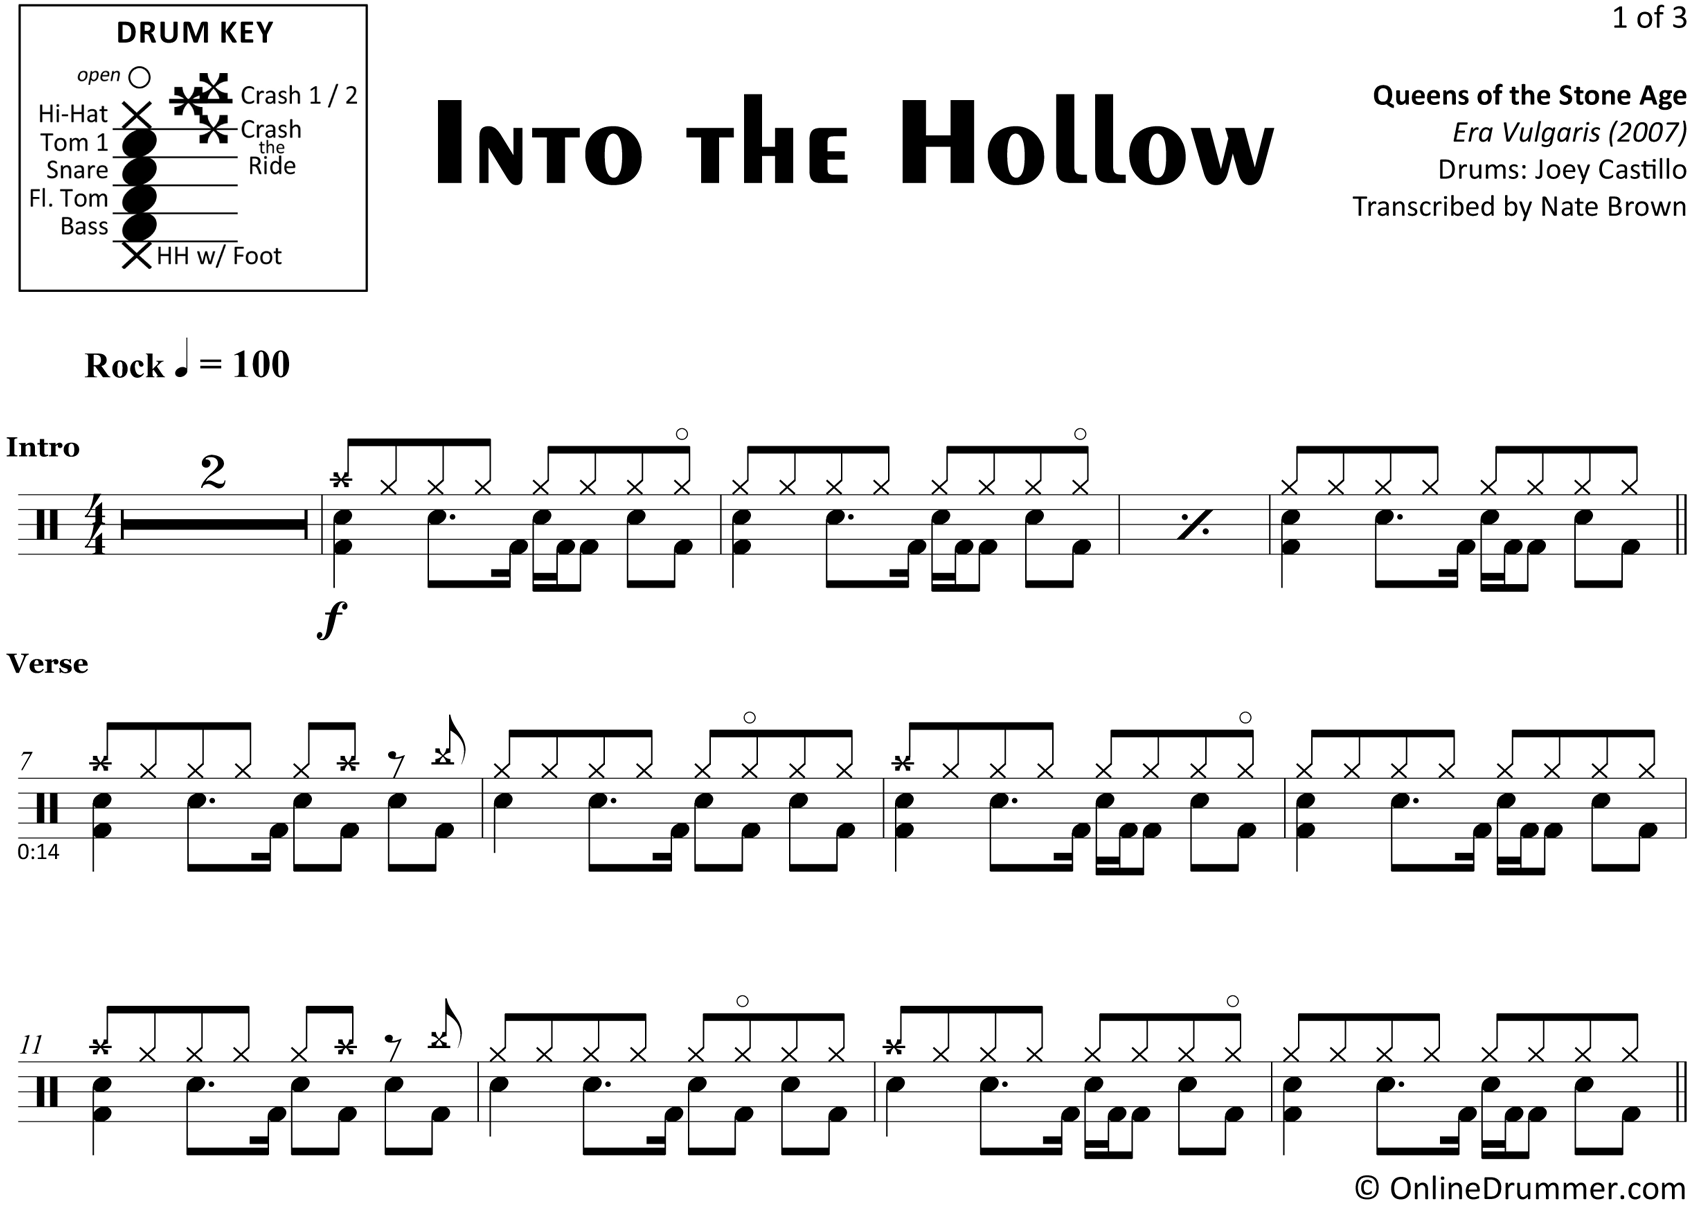 Into the Hollow - Queens of the Stone Age - Drum Sheet Music